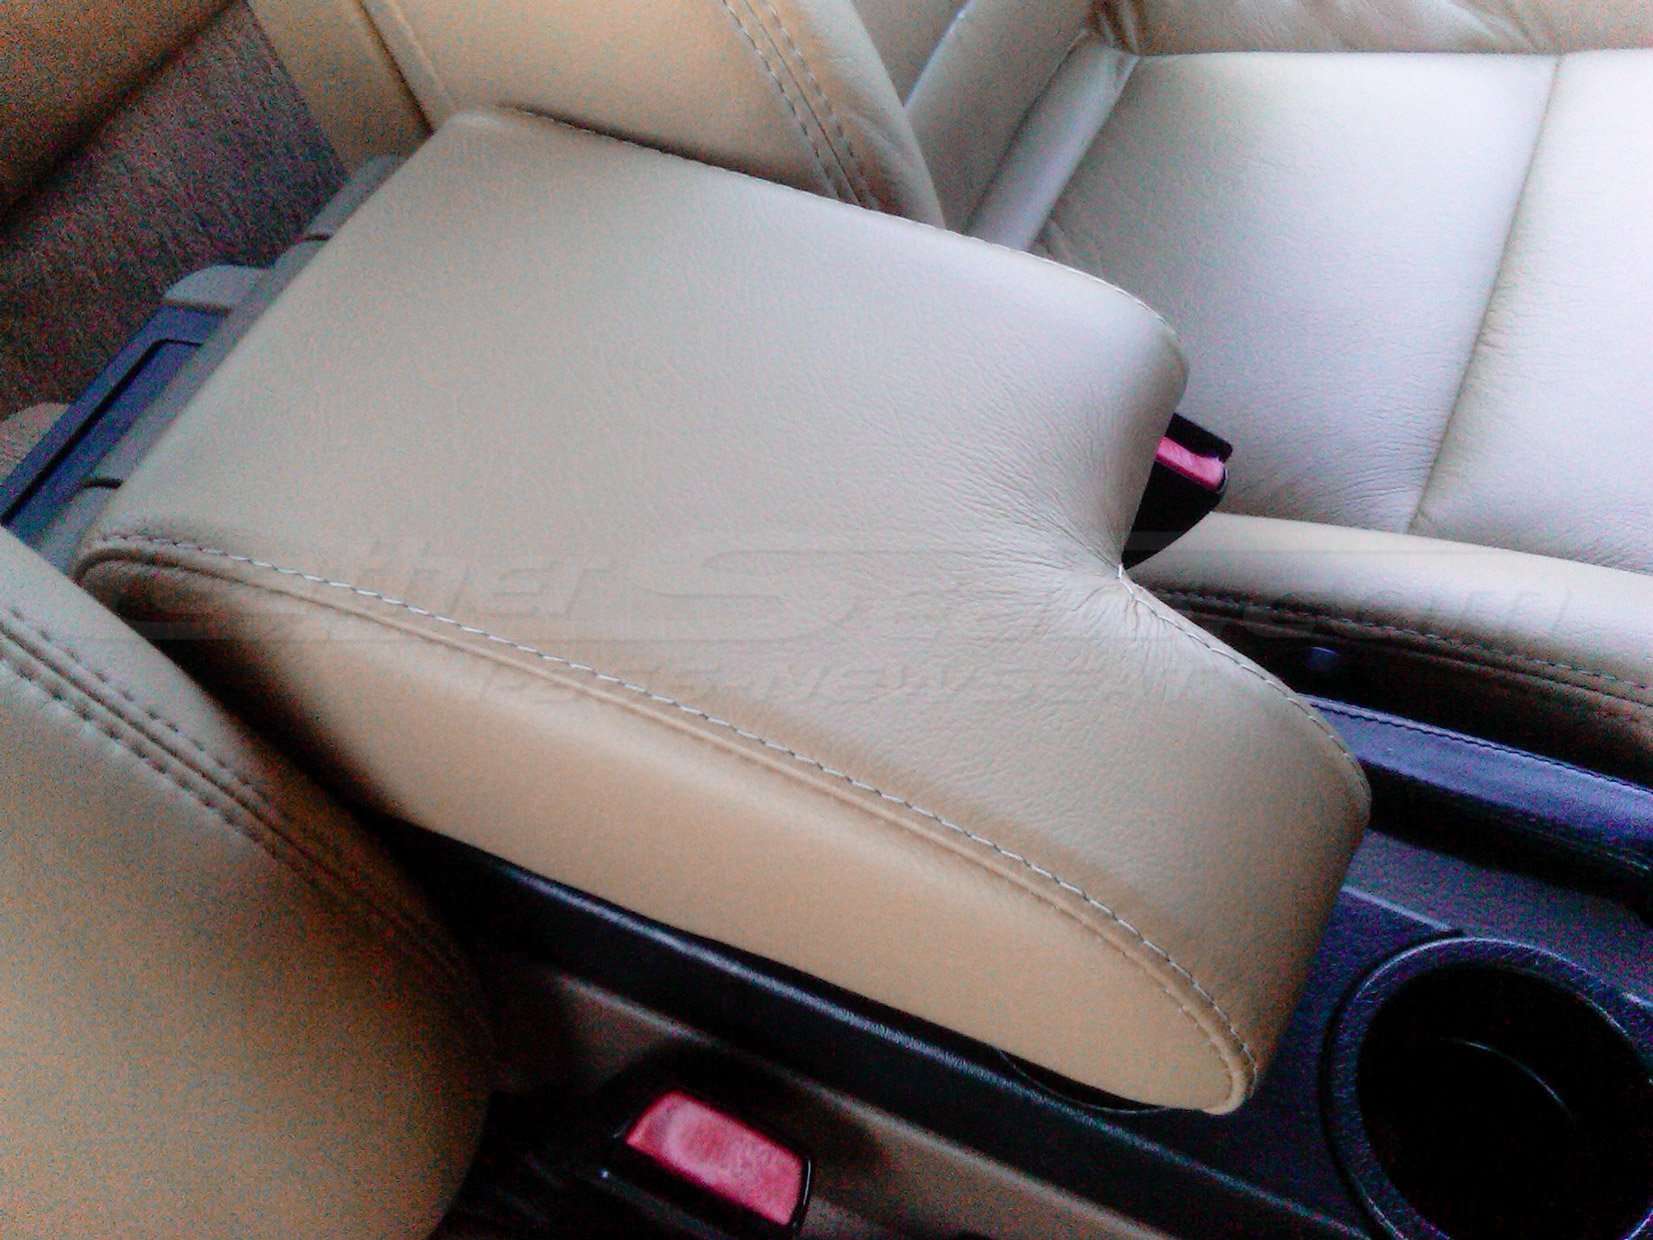 Installed BMW Console lid cover in Bisque